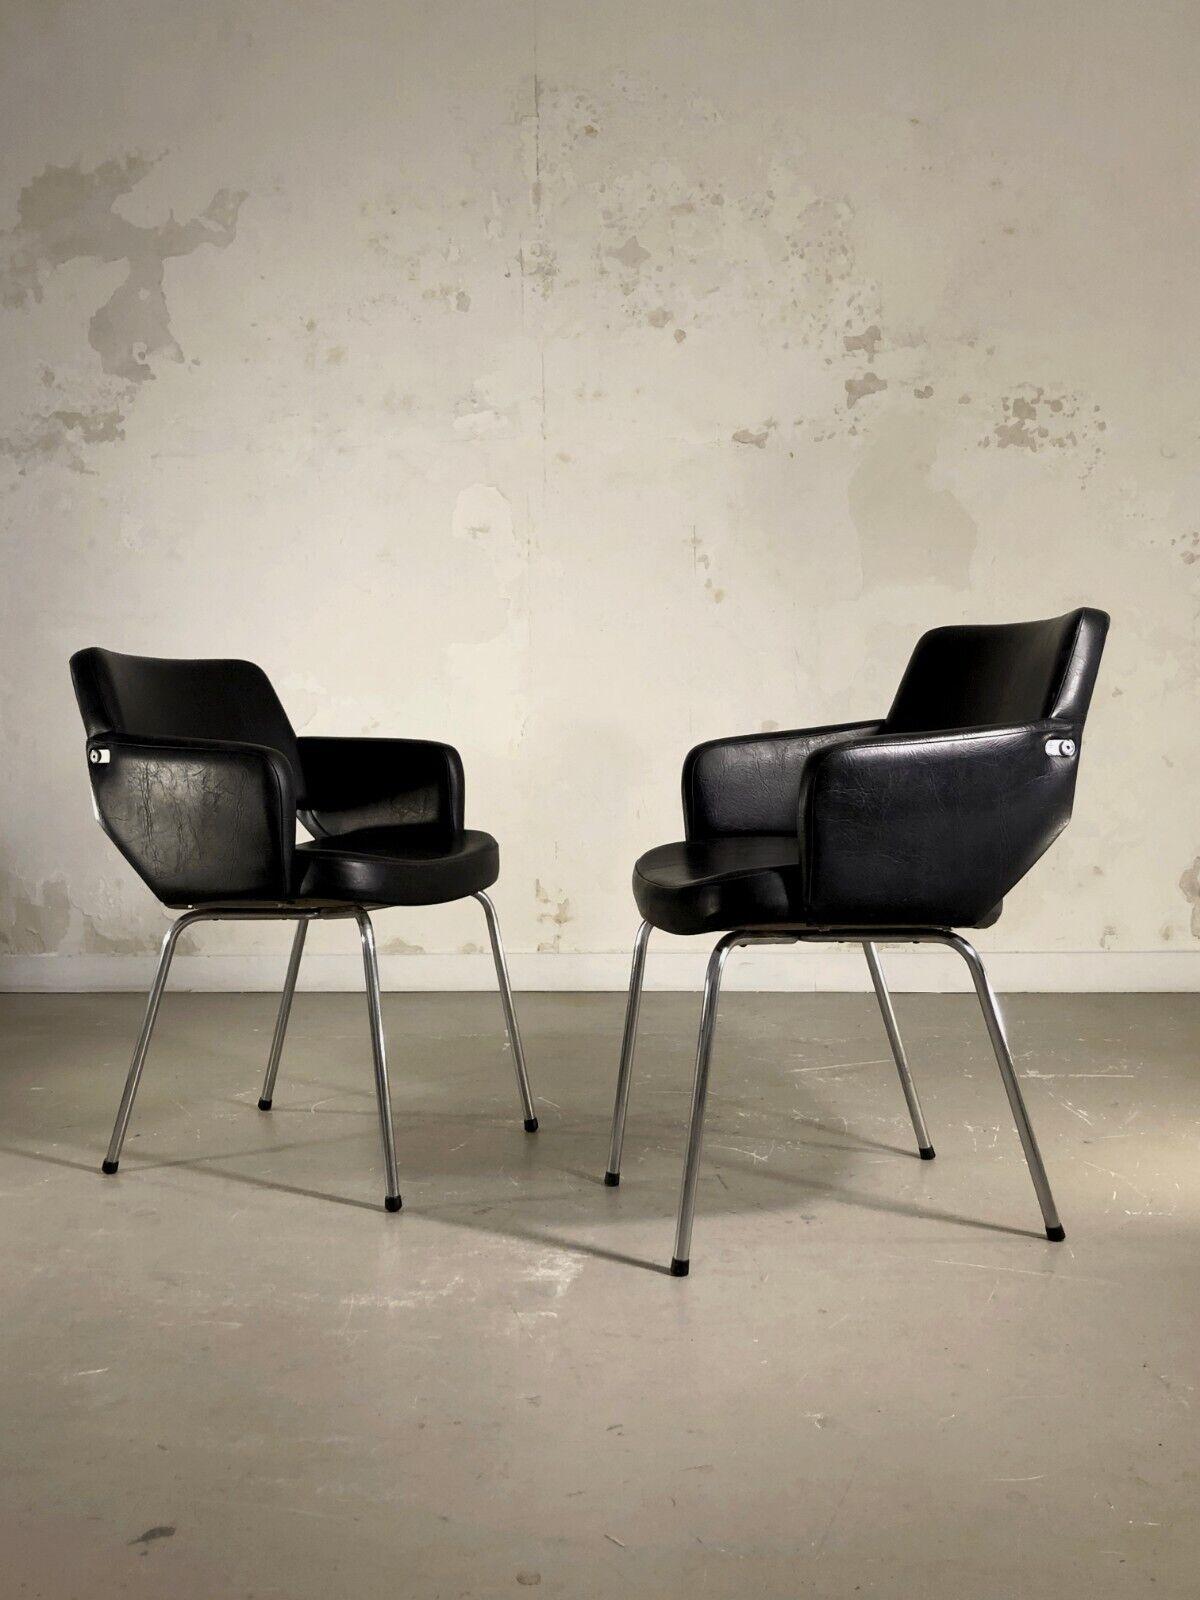 A Pair of MID-CENTURY-MODERN CHAIRS in ARP / MOTTE / GUARICHE Style, France 1950 For Sale 7